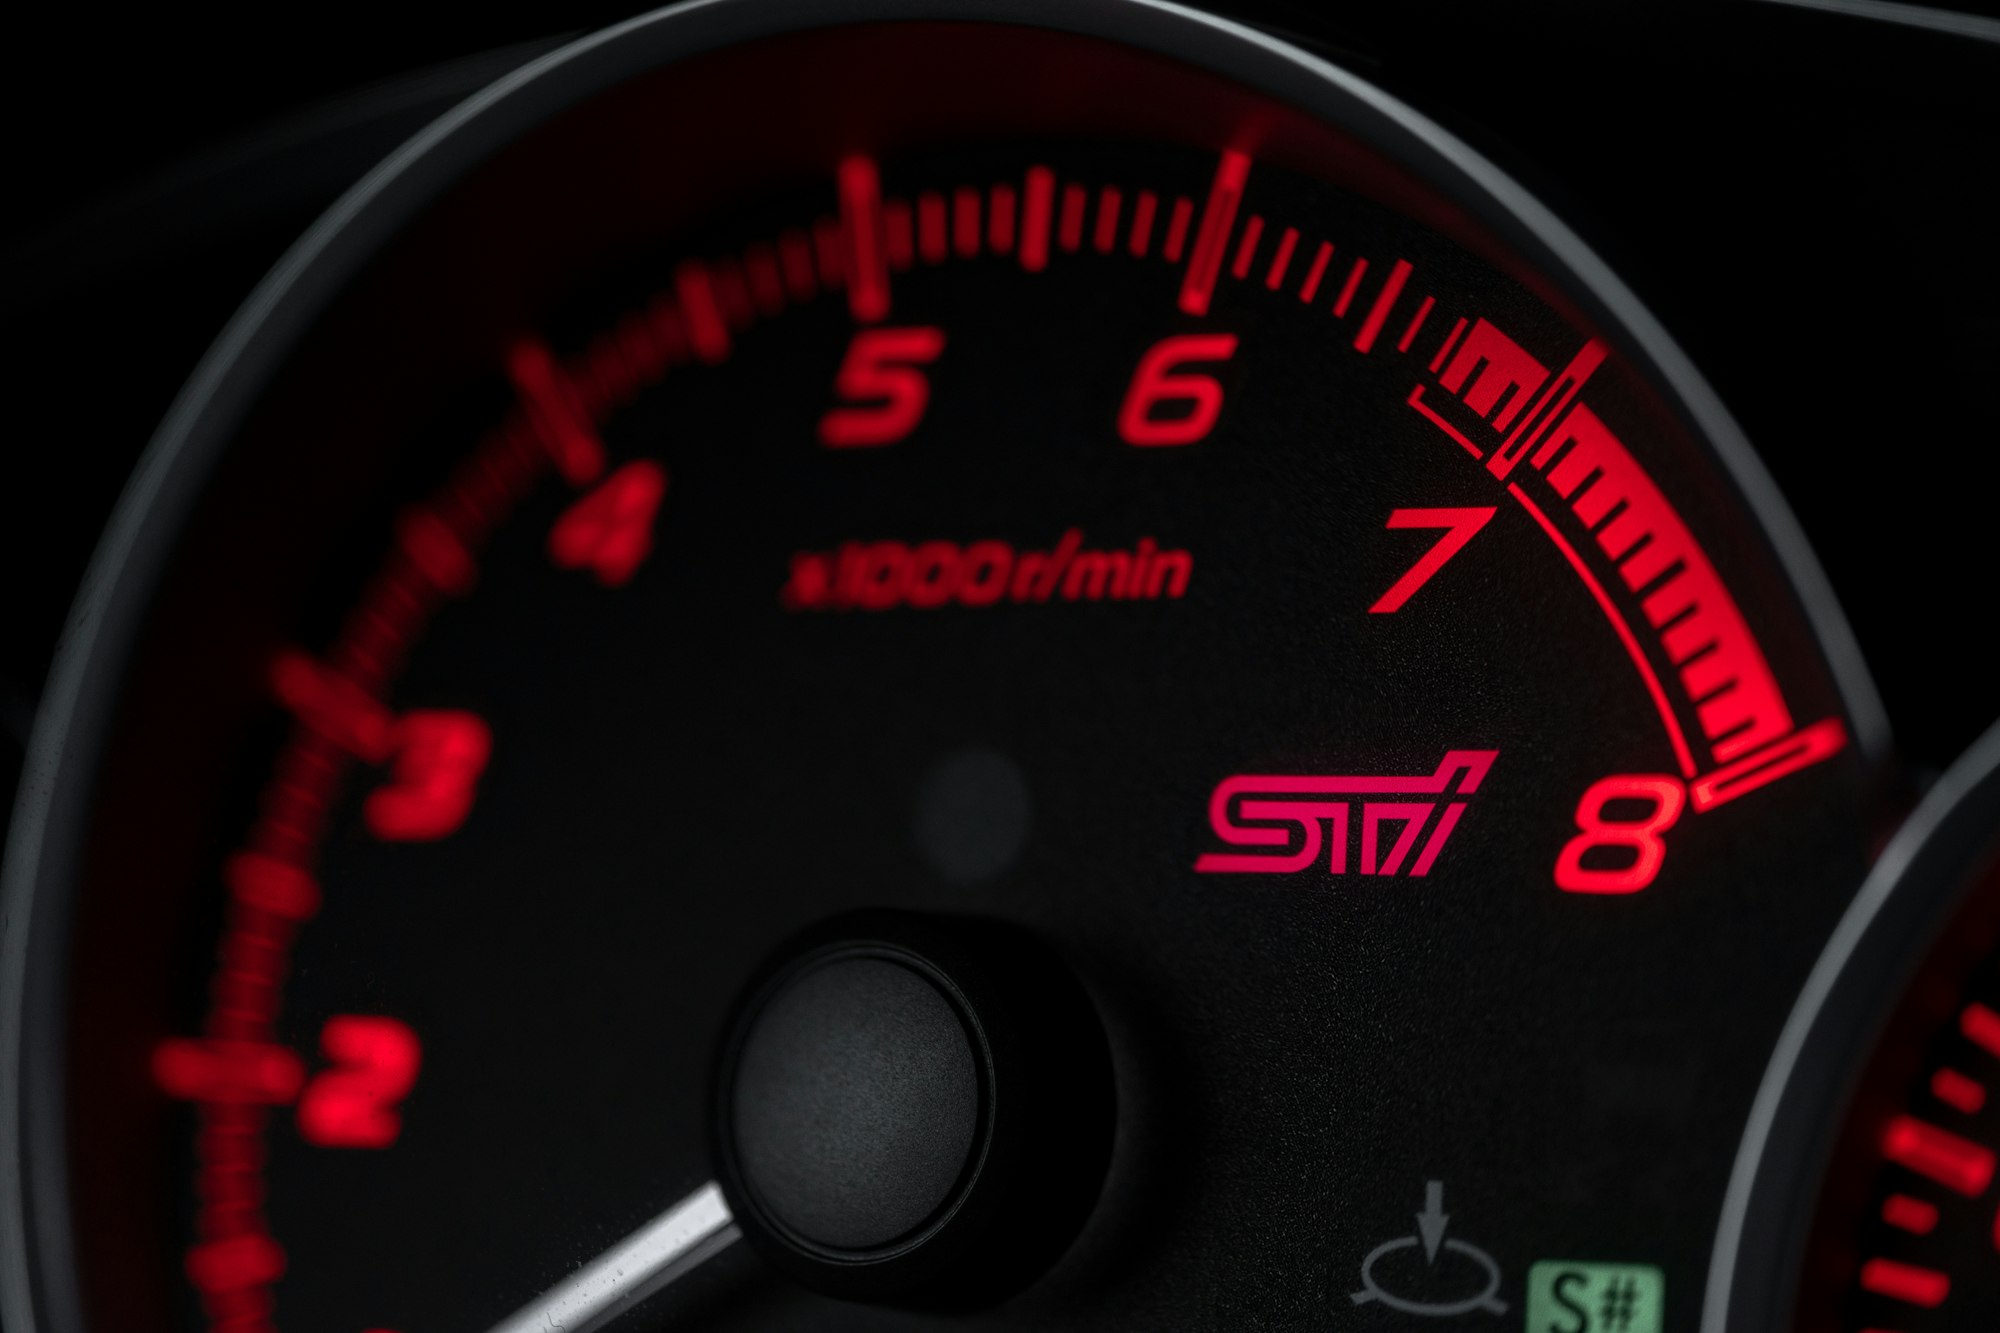 Speedometer for a supercar